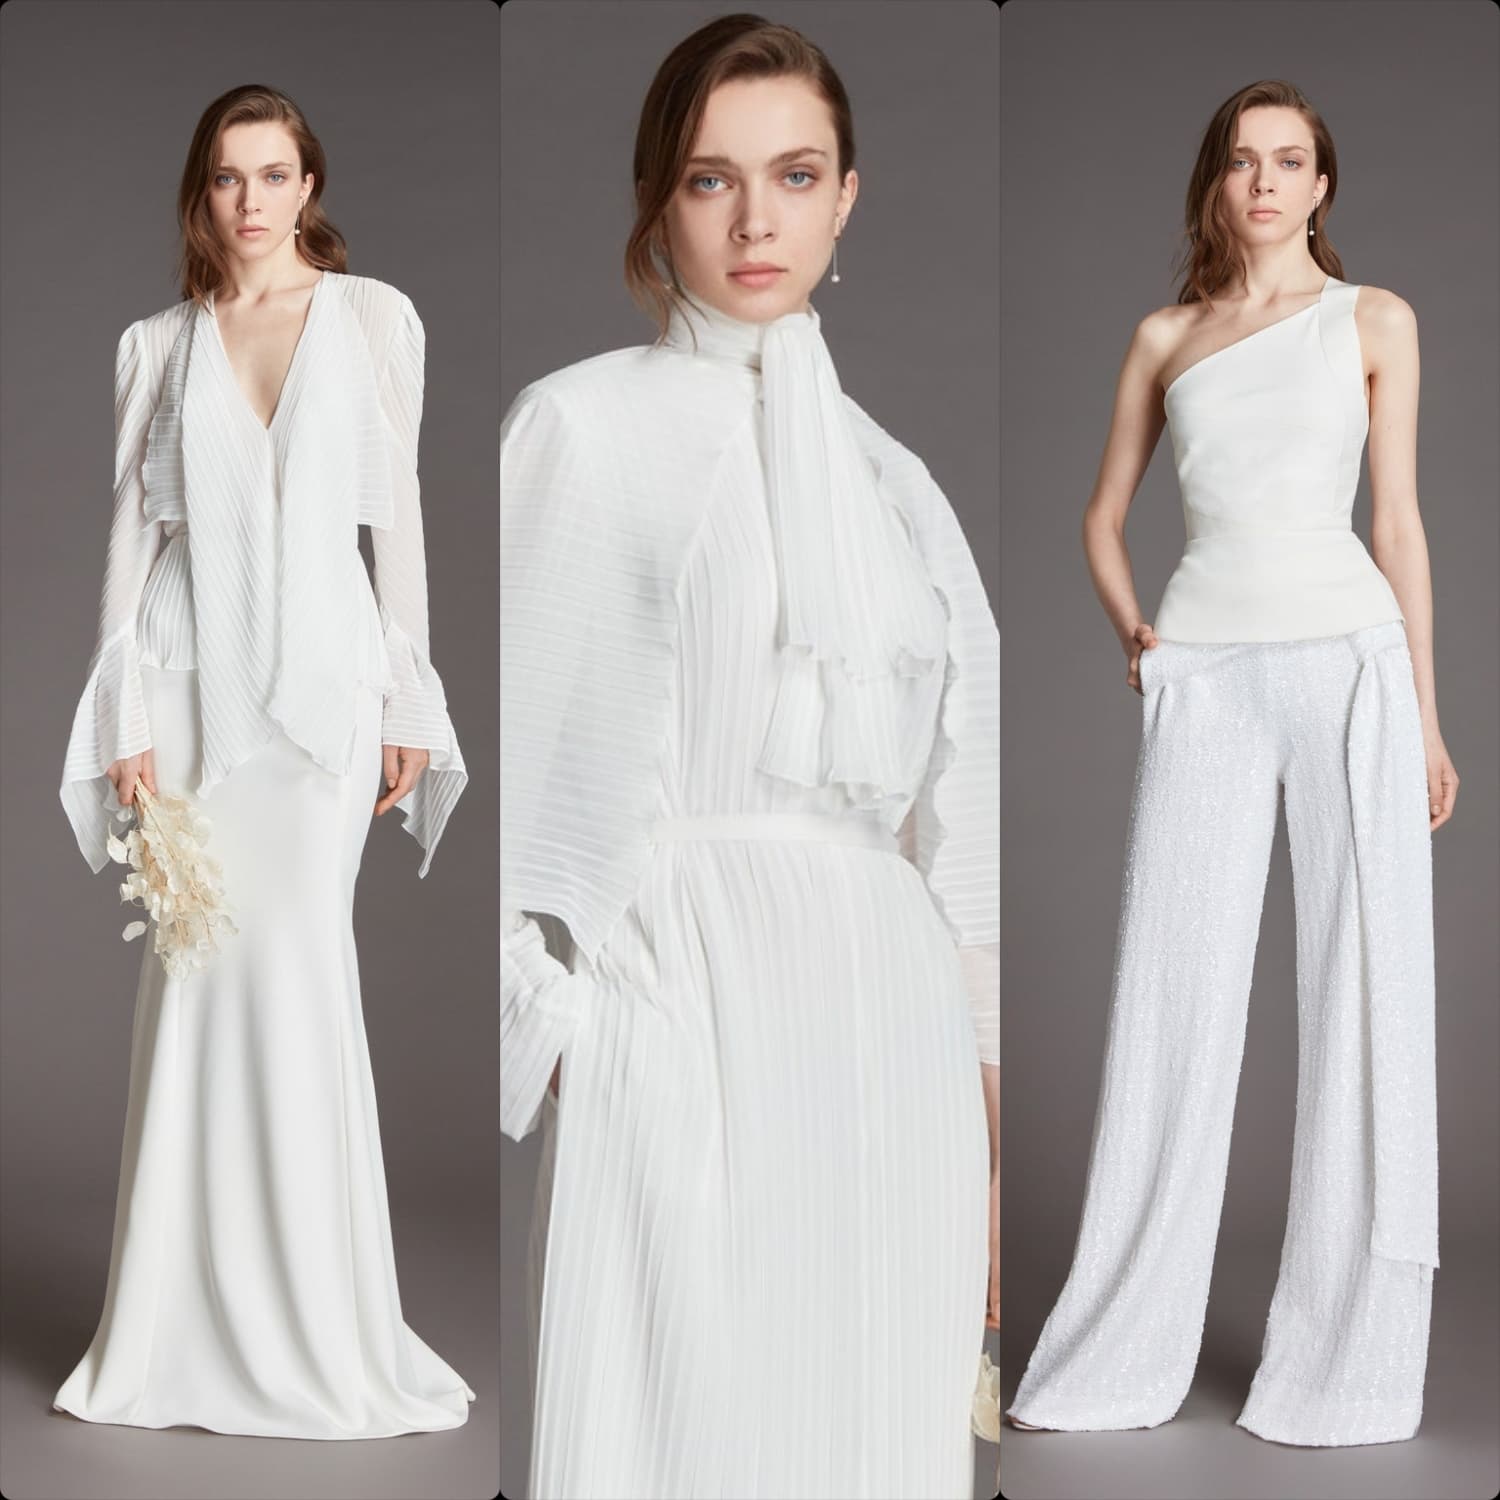 Roland Mouret Bridal Spring Summer 2021 London. RUNWAY MAGAZINE ® Collections. RUNWAY NOW / RUNWAY NEW